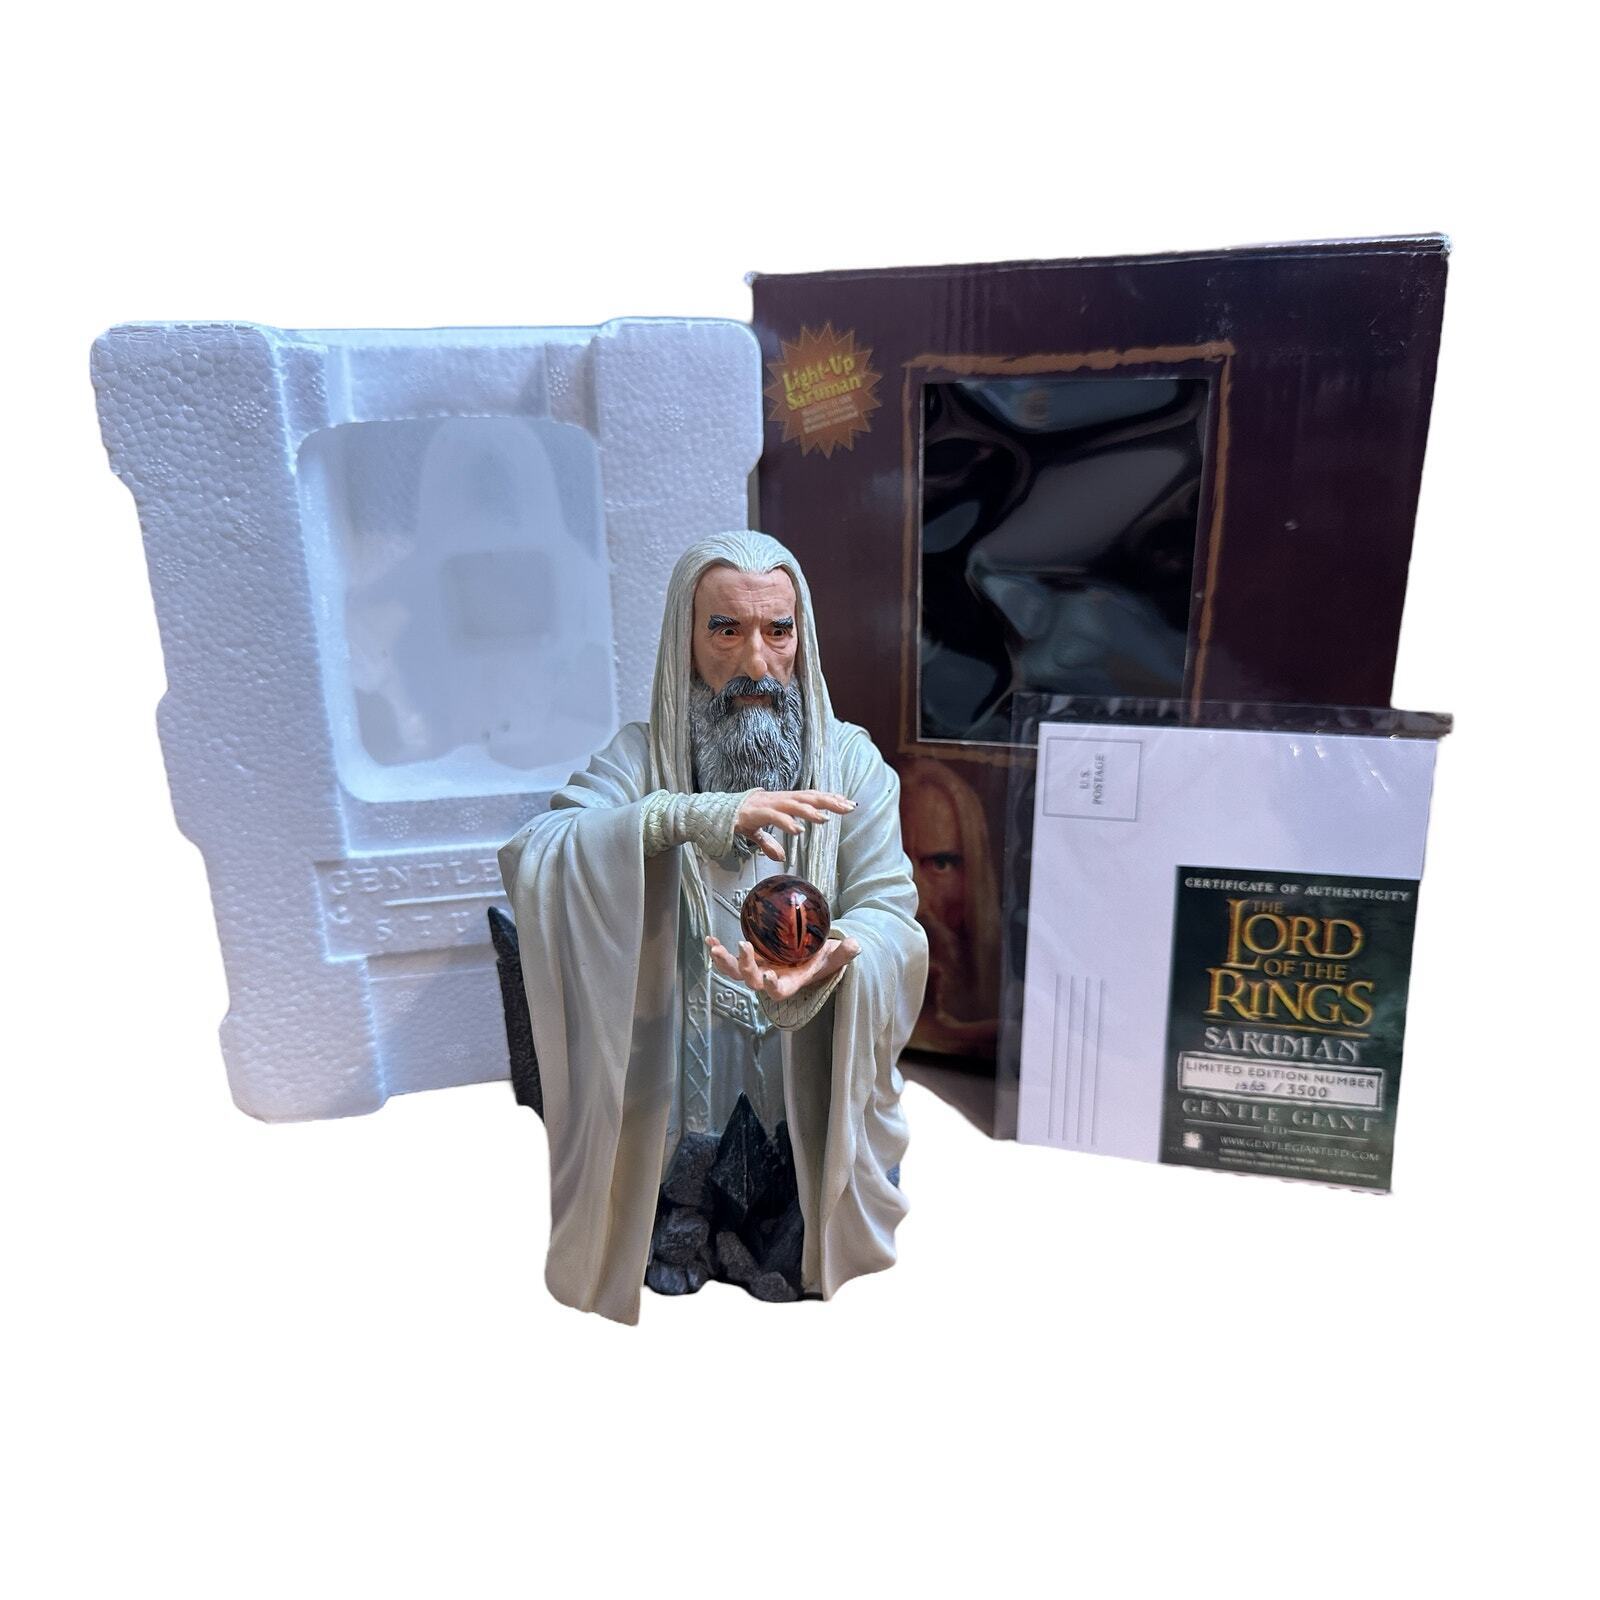 Lord of the Rings SARUMAN Mini Bust statue by Gentle Giant #/3500